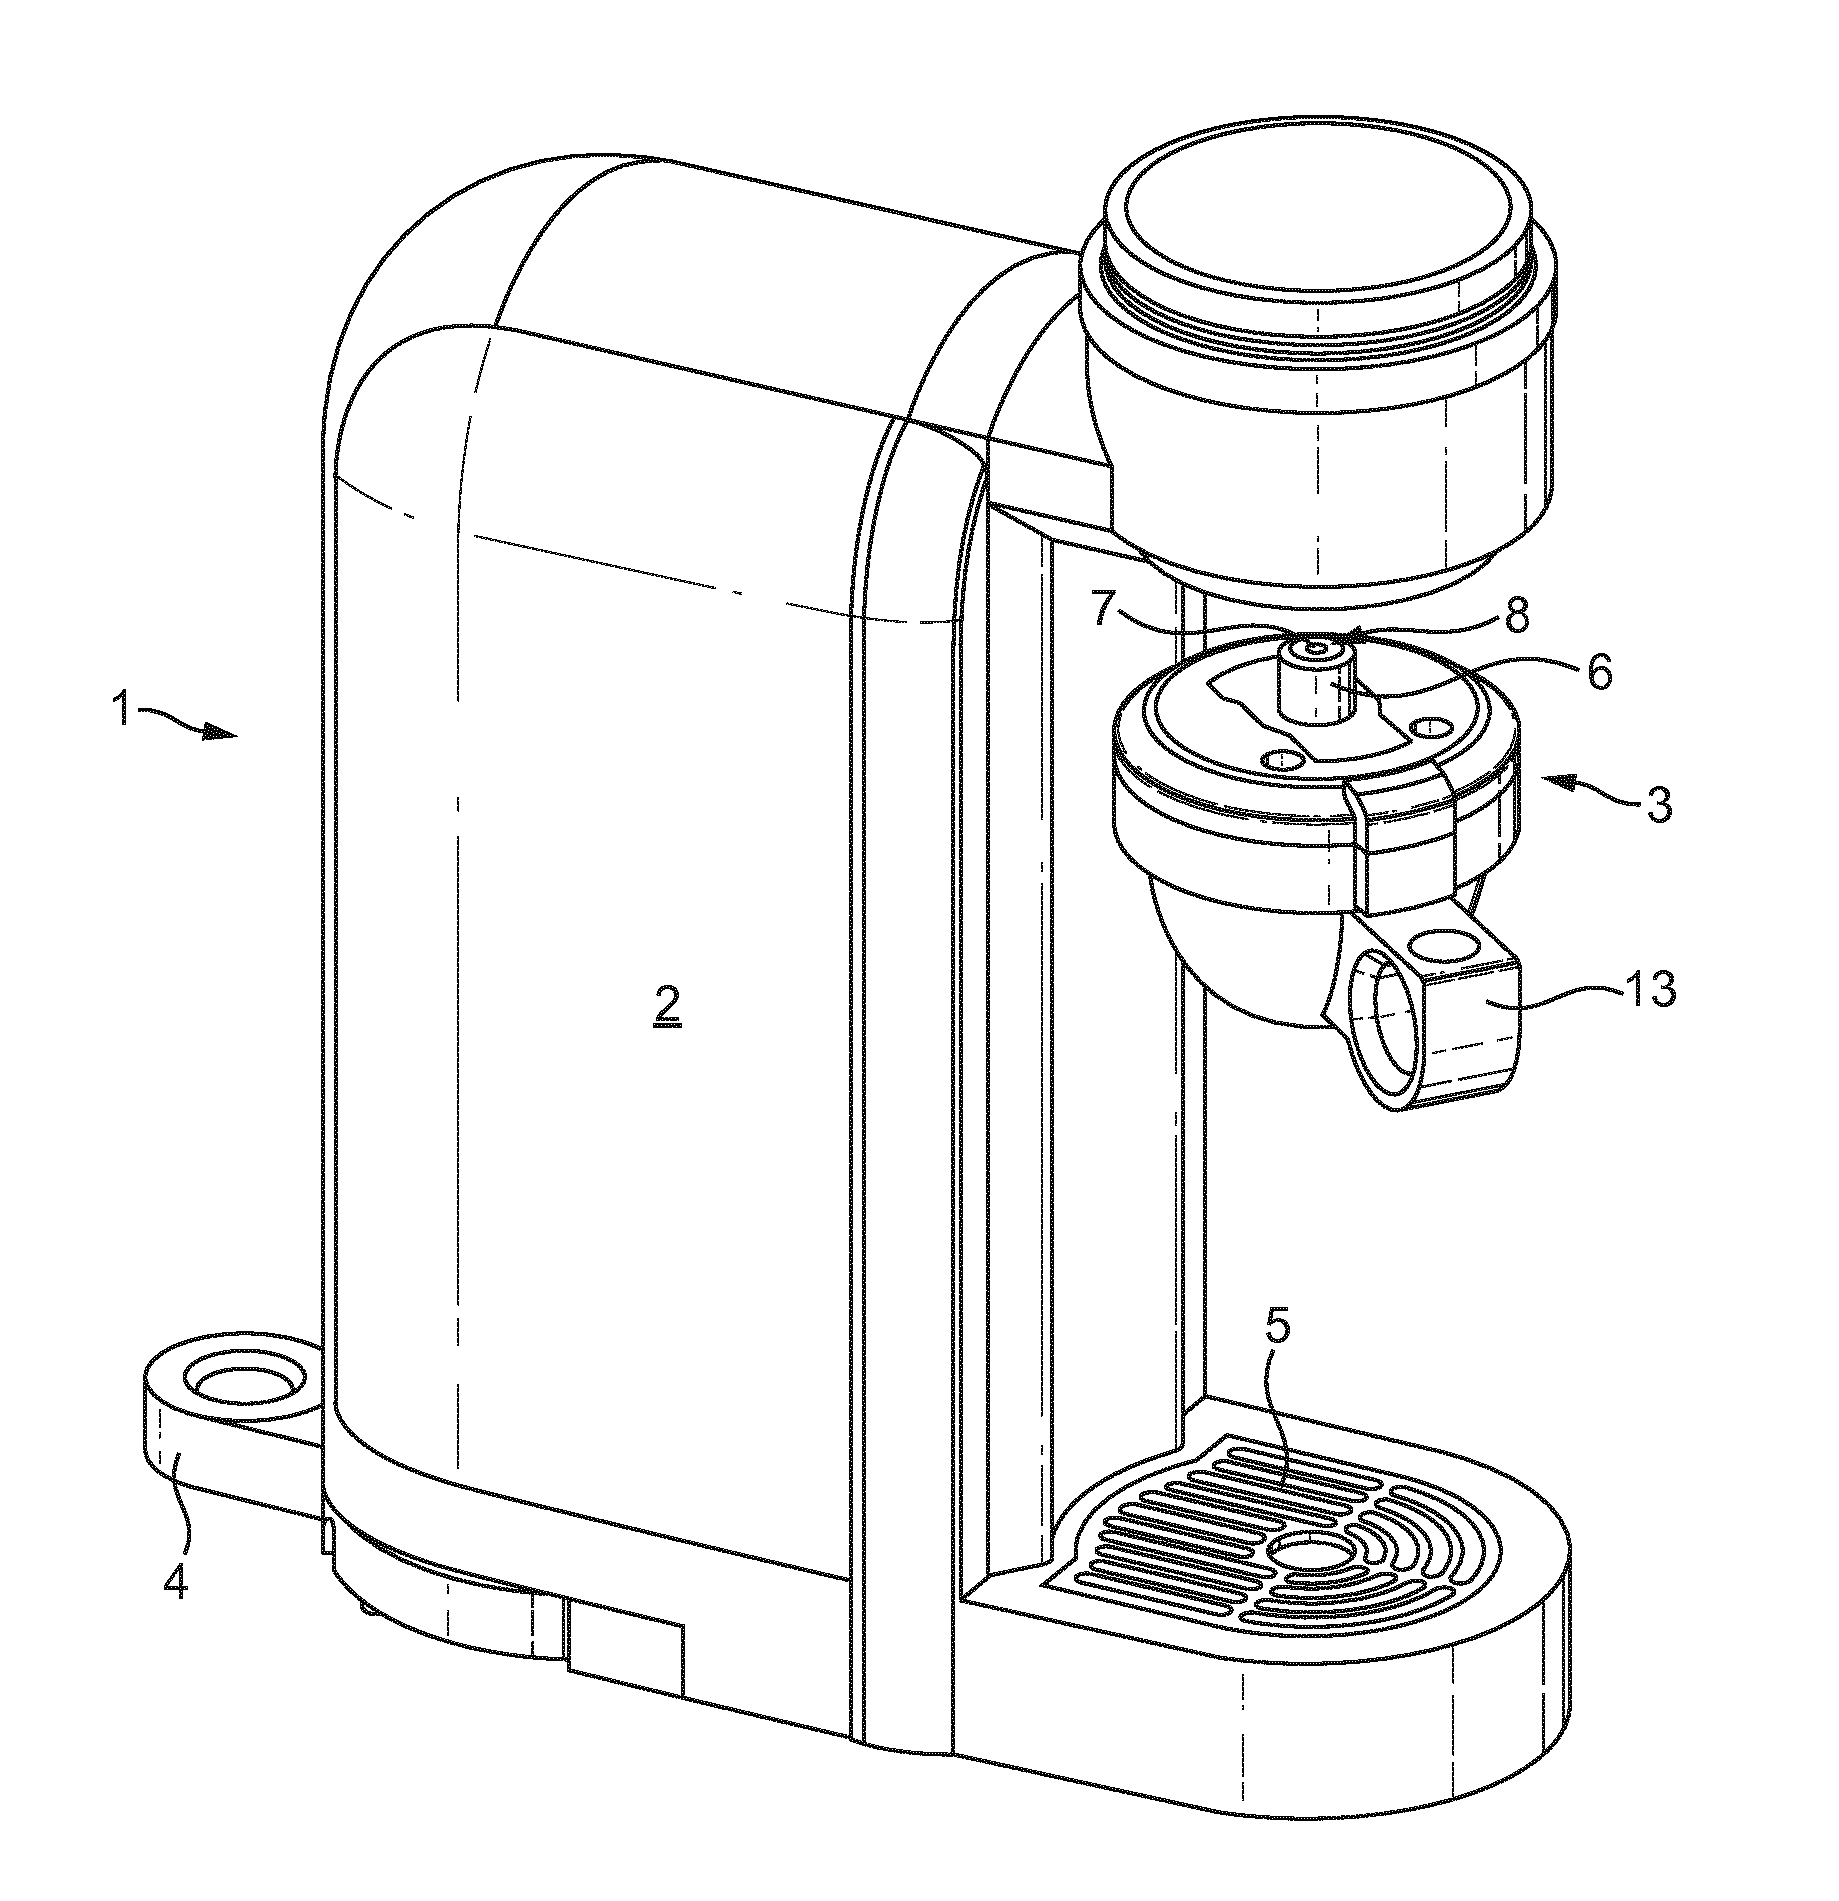 A food or beverage preparation machine with detachable brewing unit